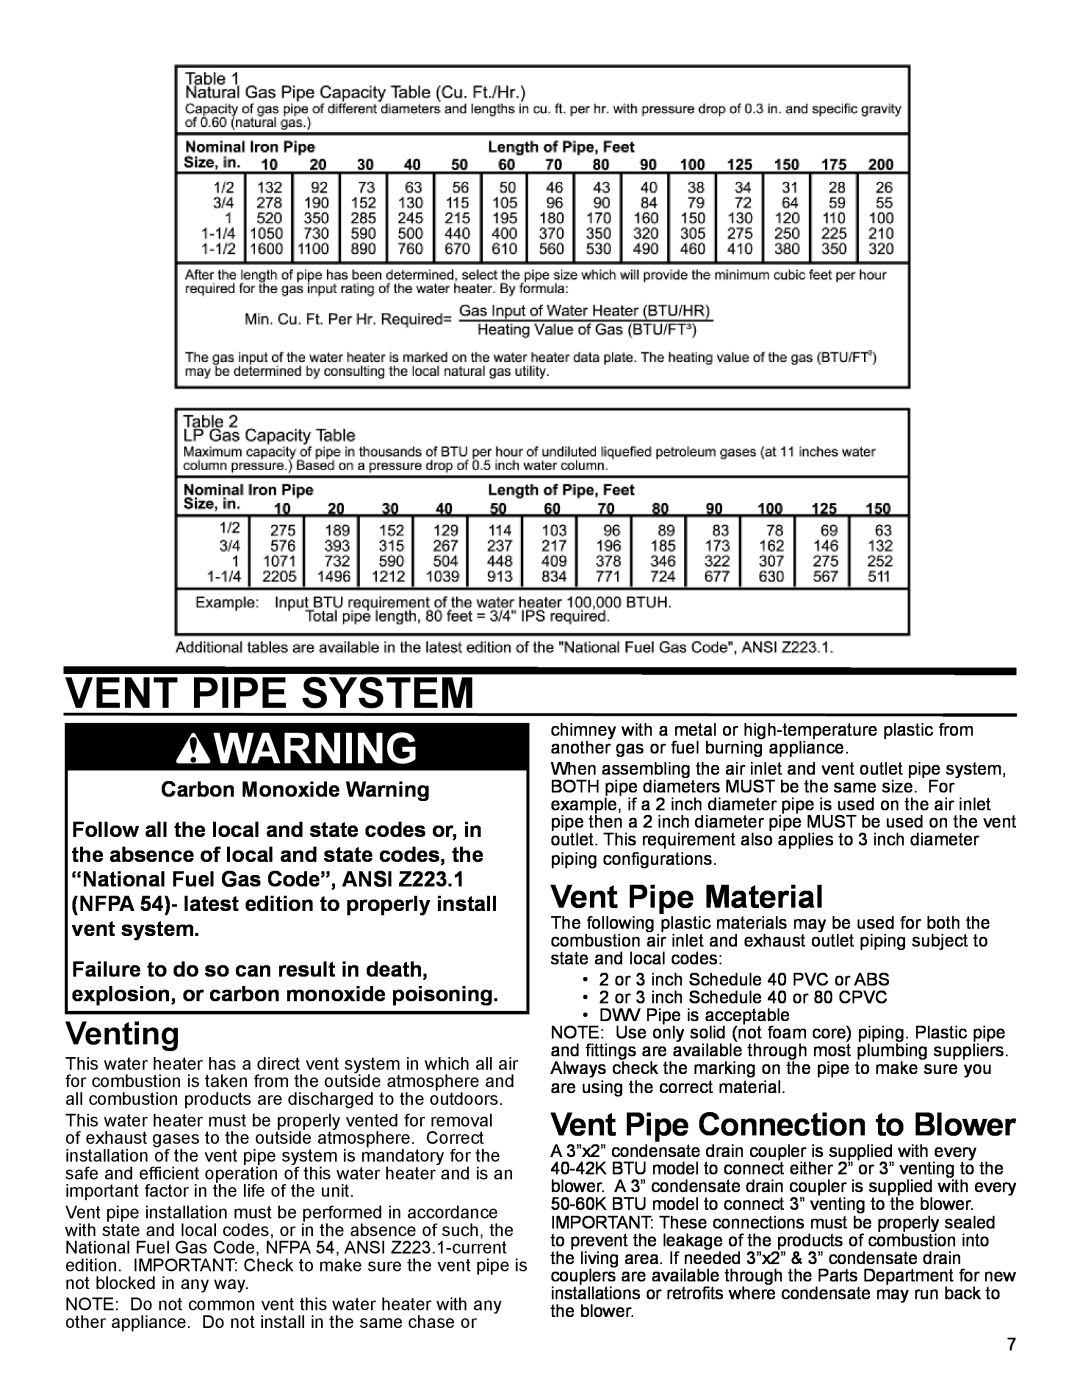 American Water Heater 50-60K BTU, 40-42K BTU Vent Pipe System, Venting, Vent Pipe Material, Vent Pipe Connection to Blower 